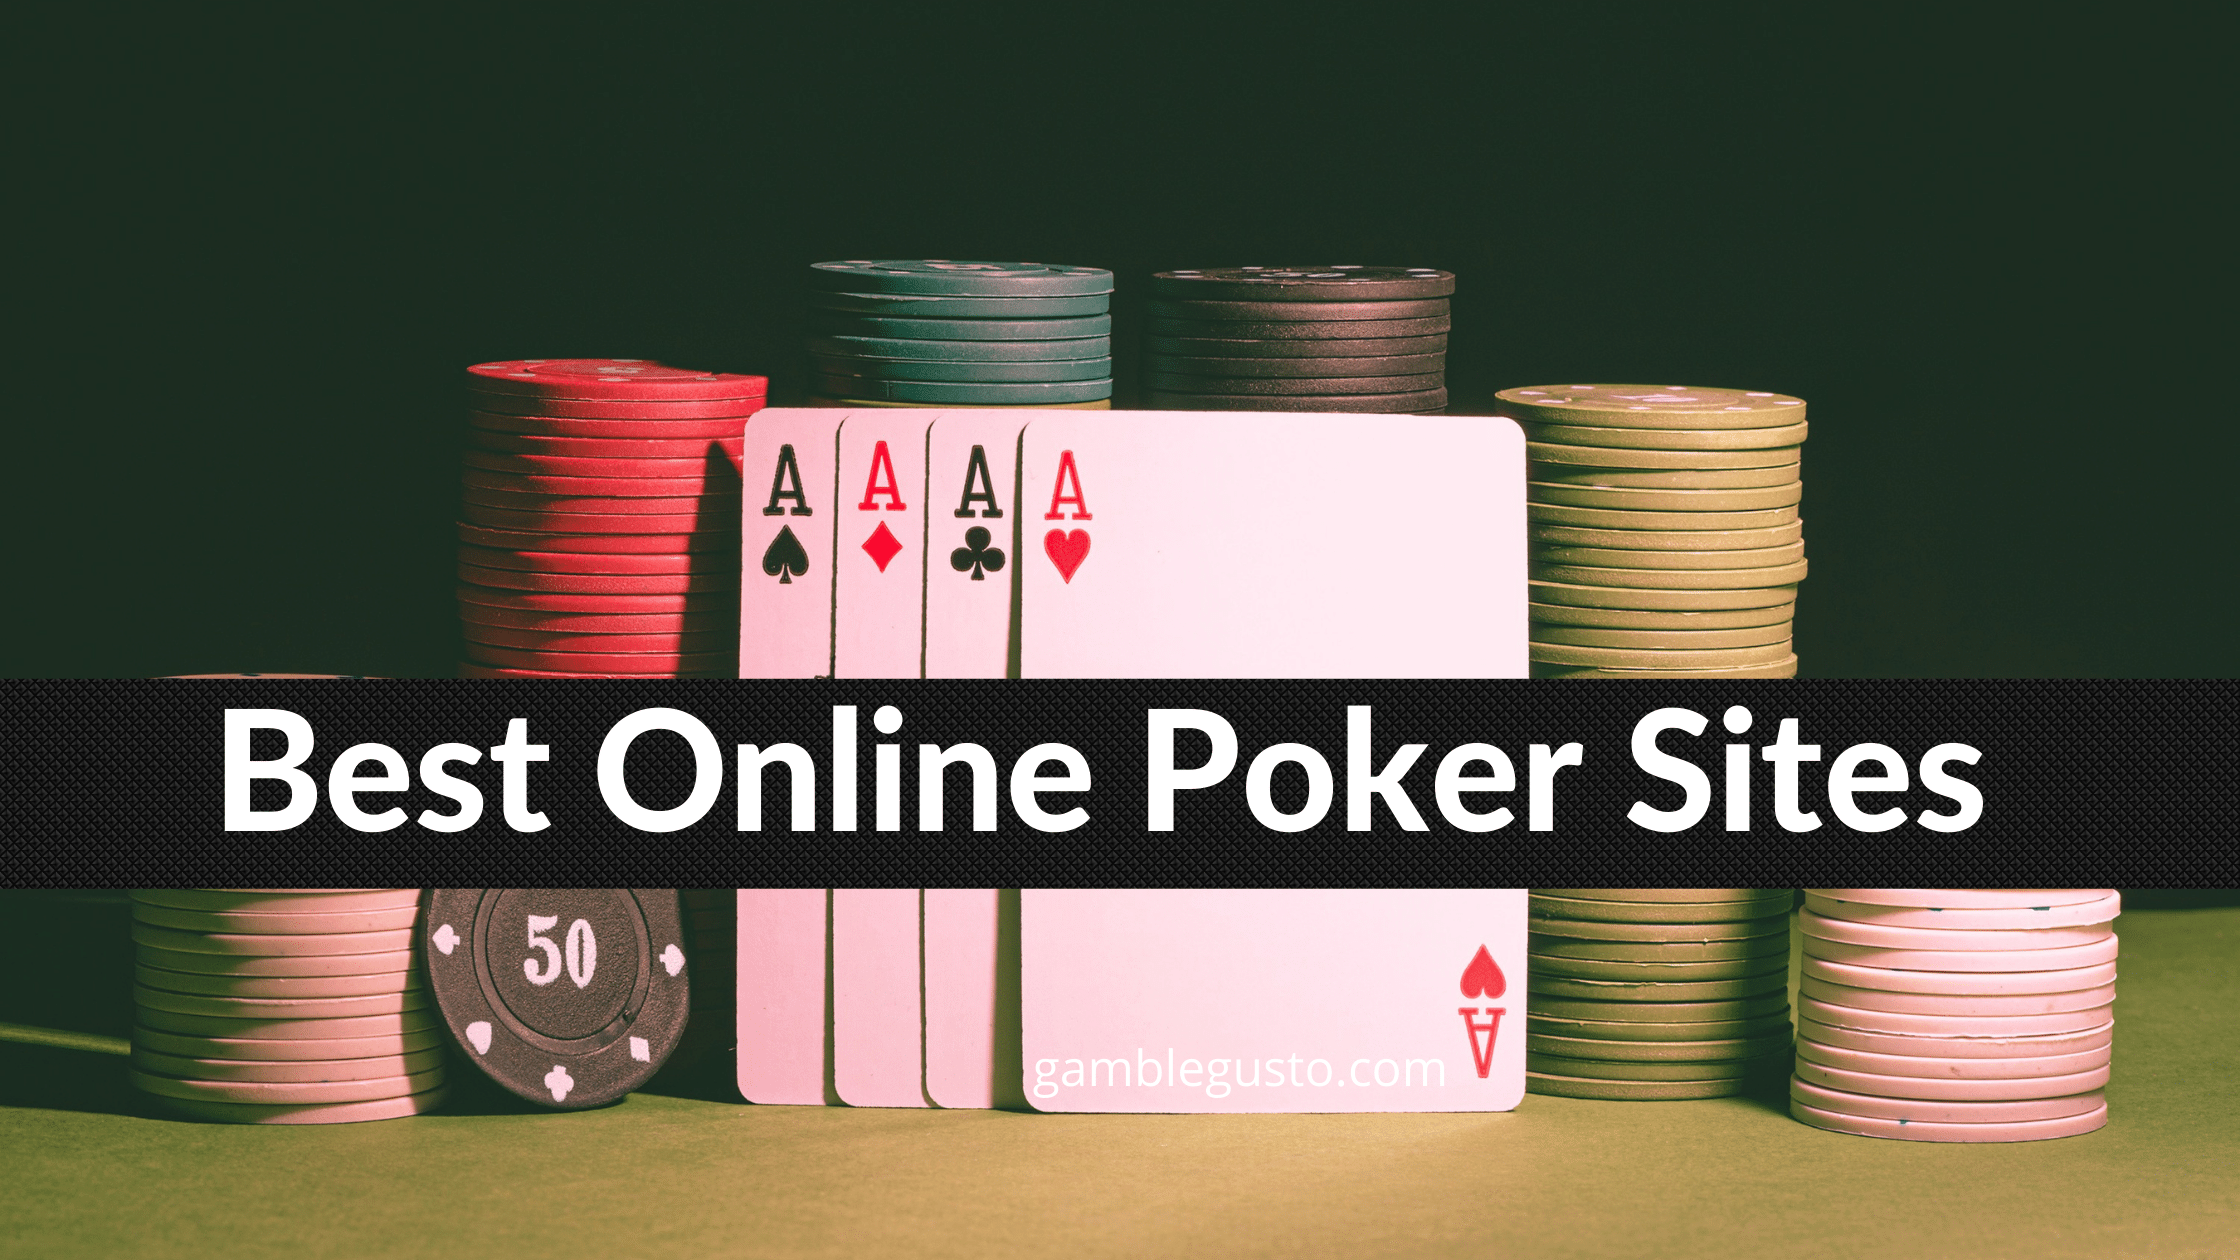 How to Find the Best Online Poker Site